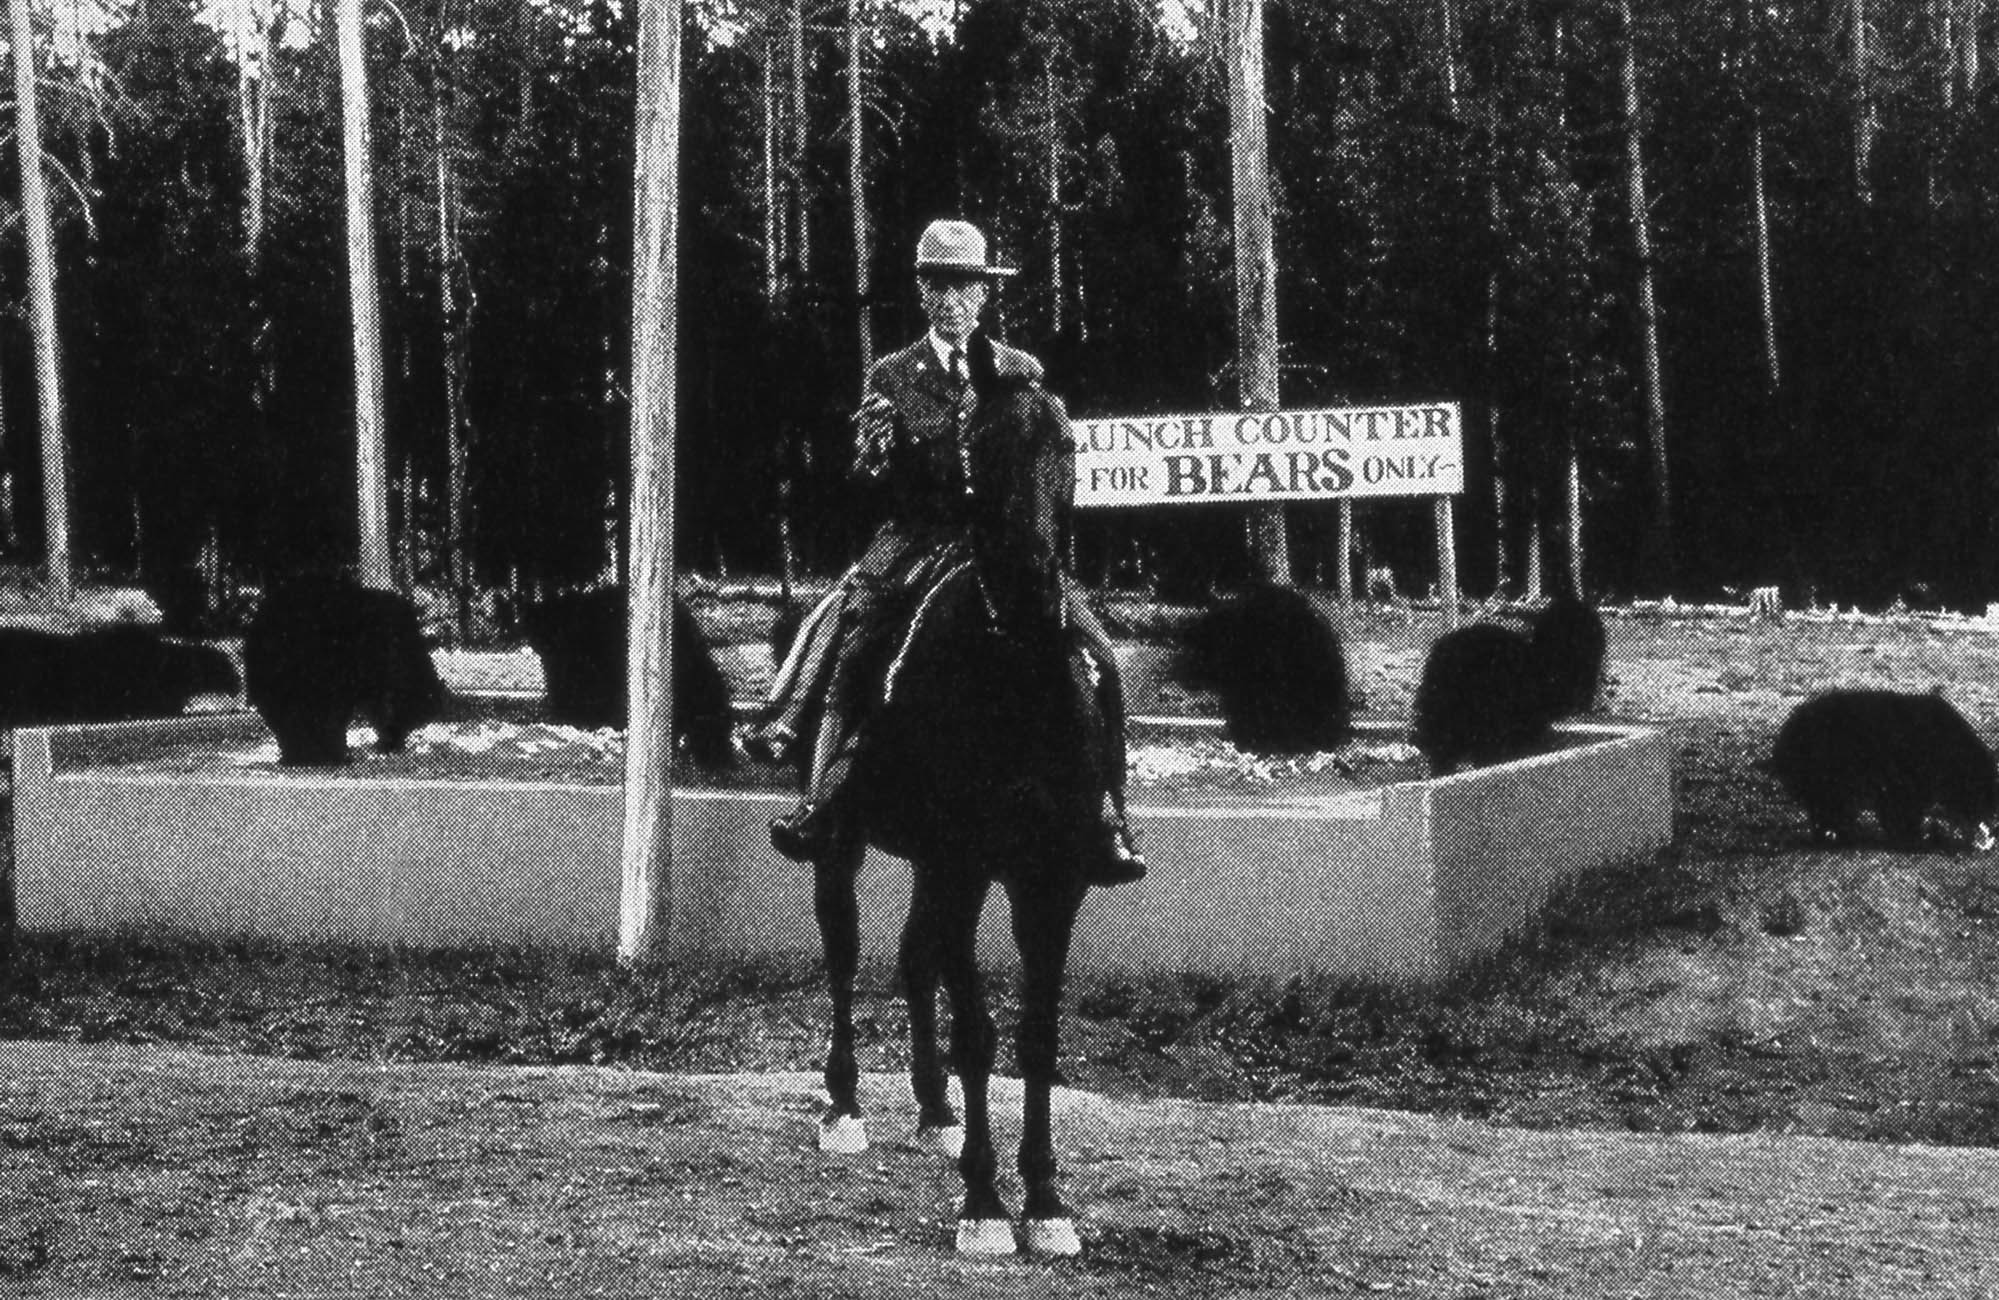 A park ranger on a horse in front of a sign that reads "Lunch Counter for Bears Only," with bears feeding in a box around it. 